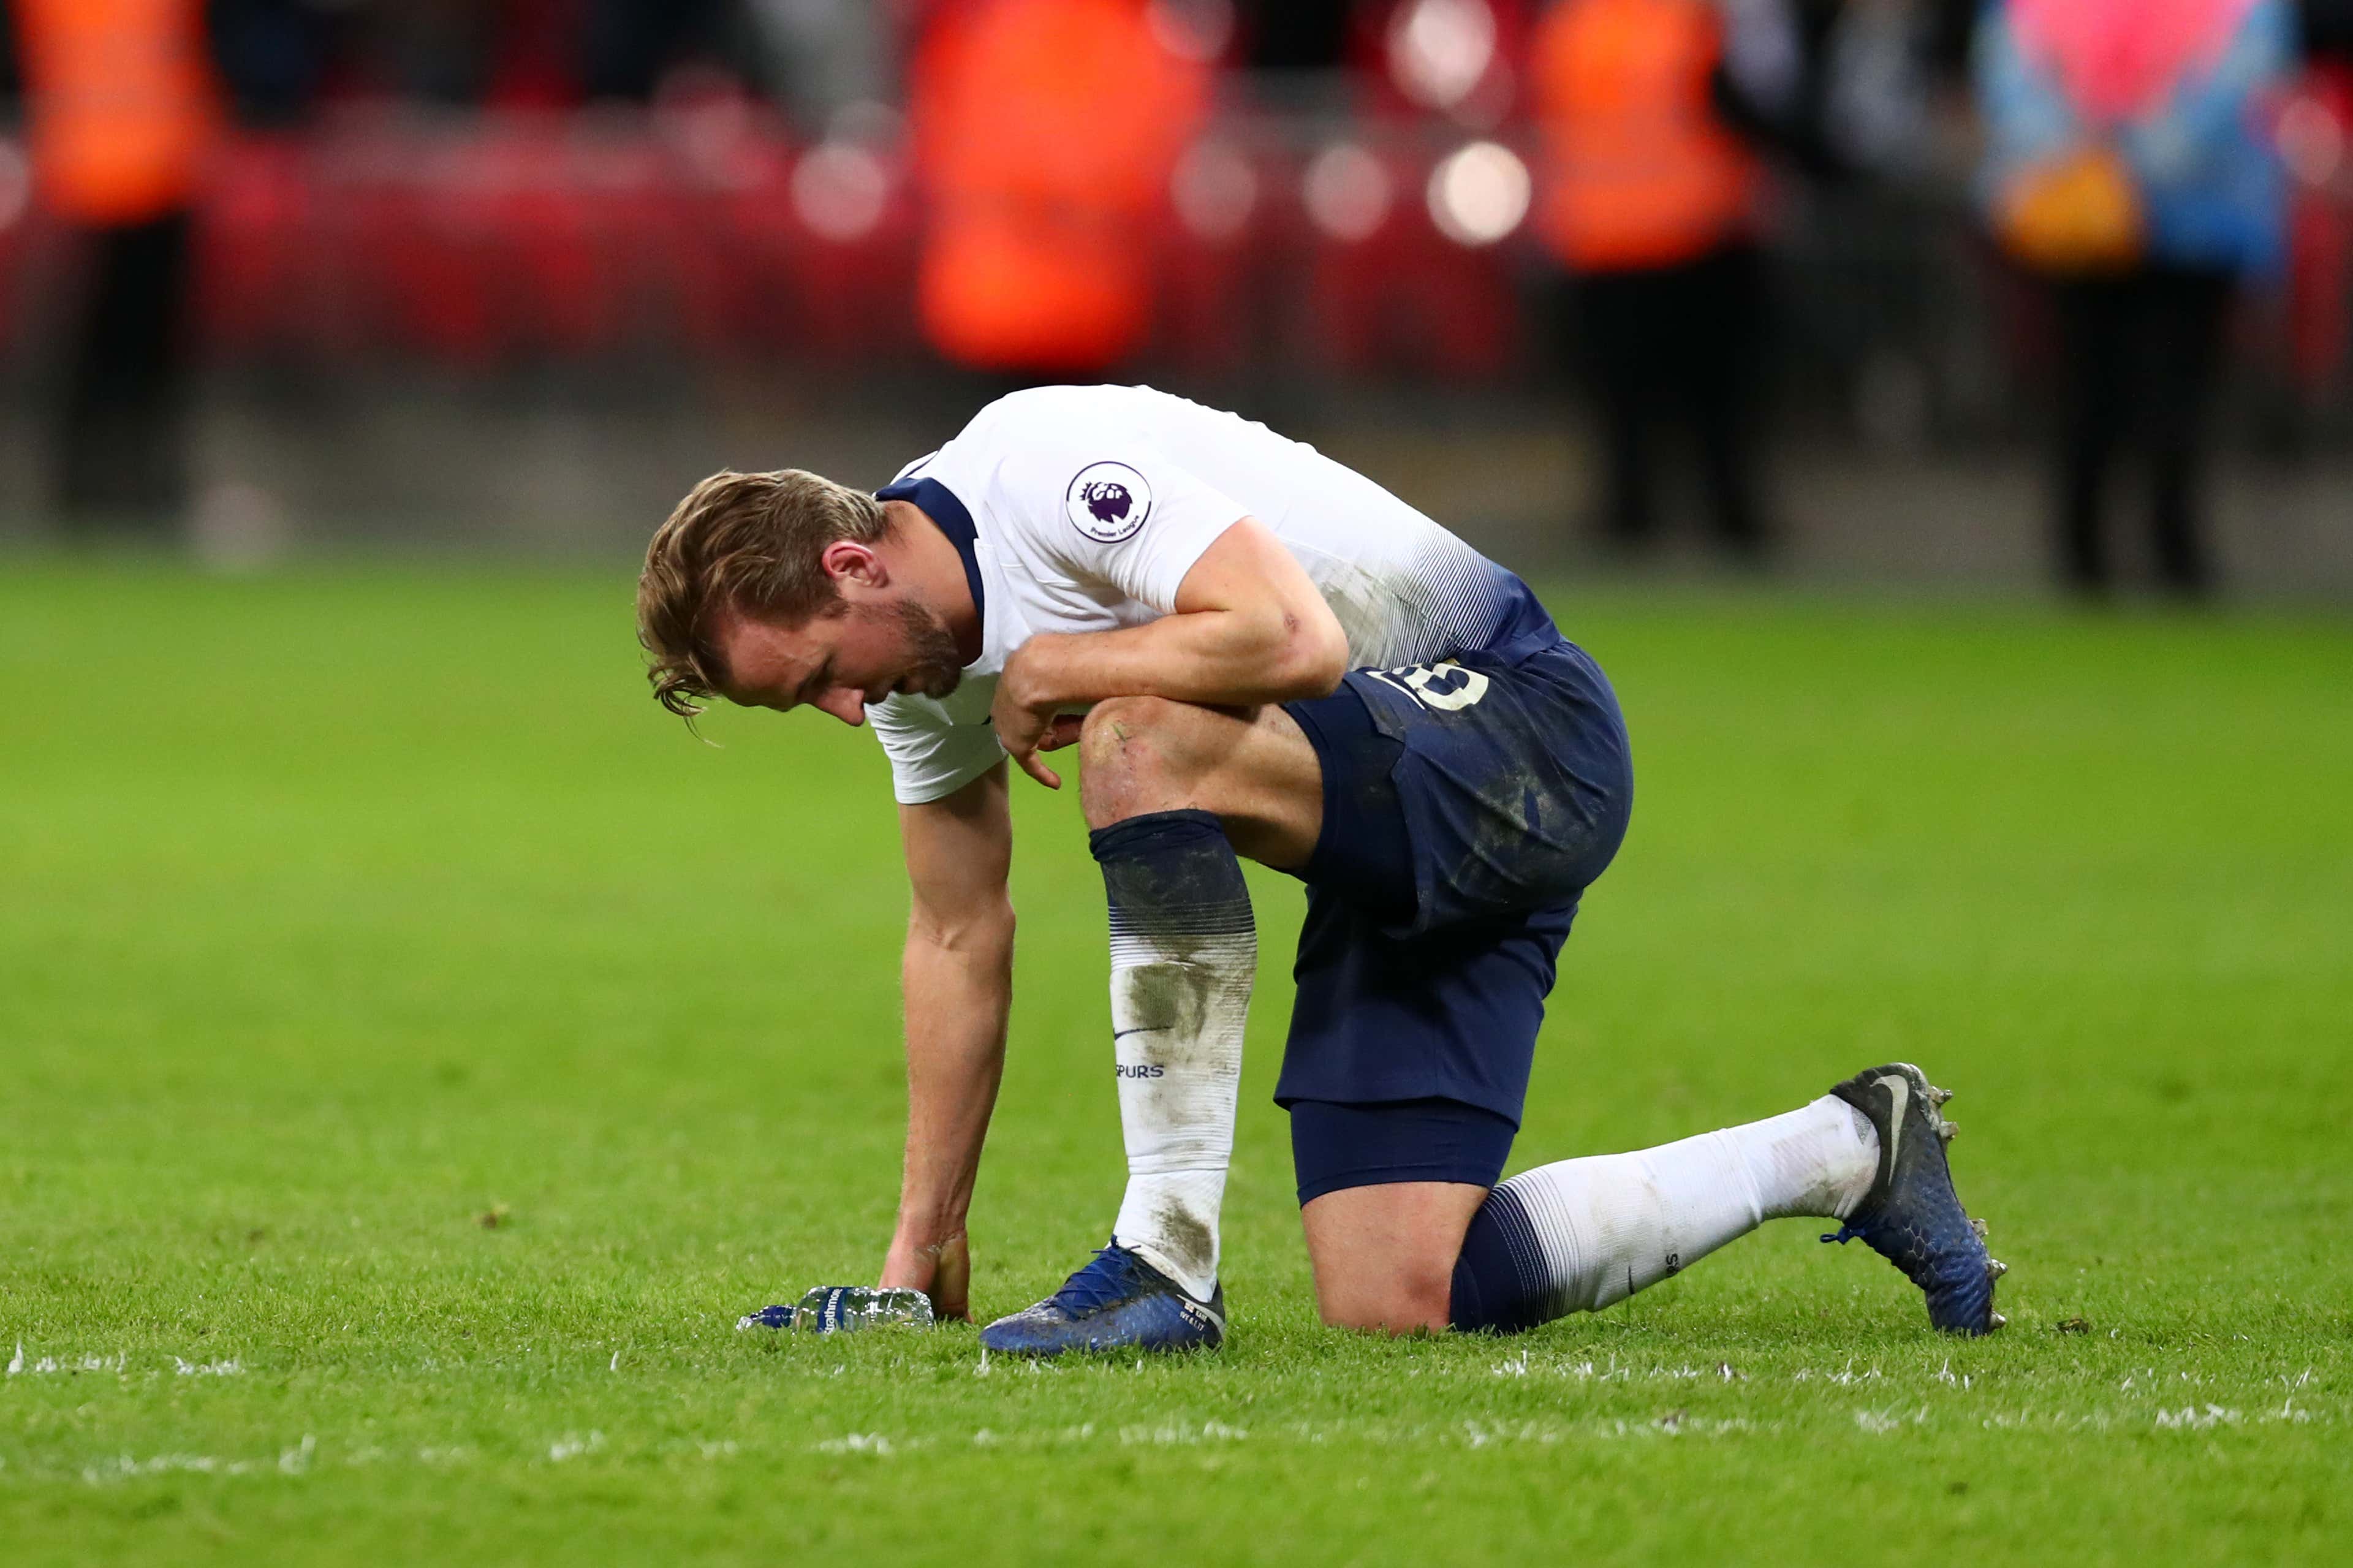 EPL results 2021, Liverpool FC vs Tottenham, score, result, Harry Kane  injury, goals, highlights, table, Premier League, fixtures